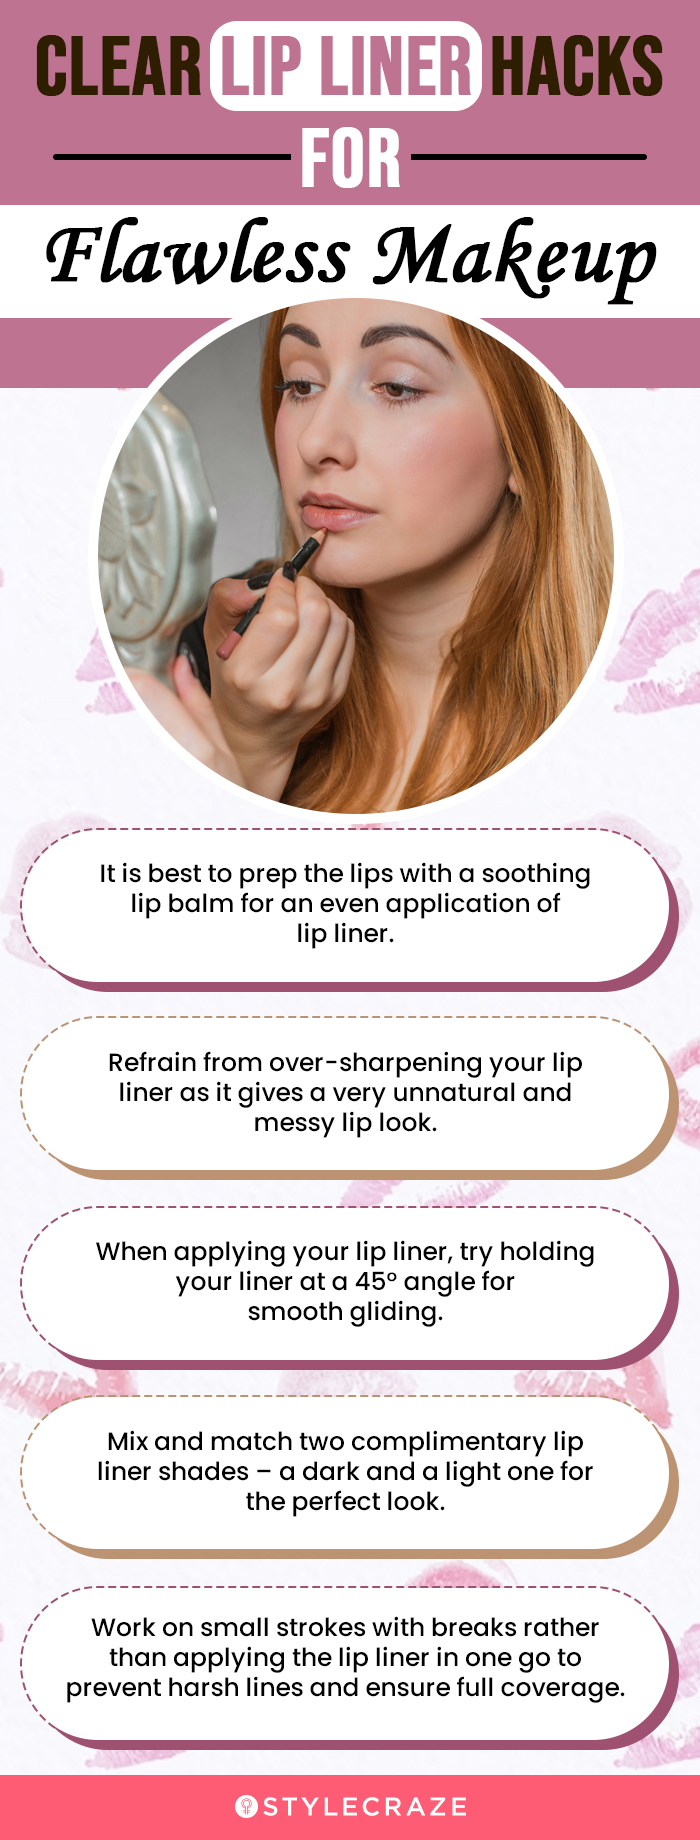 Clear Lip Liner Hacks For Flawless Makeup(infographic)